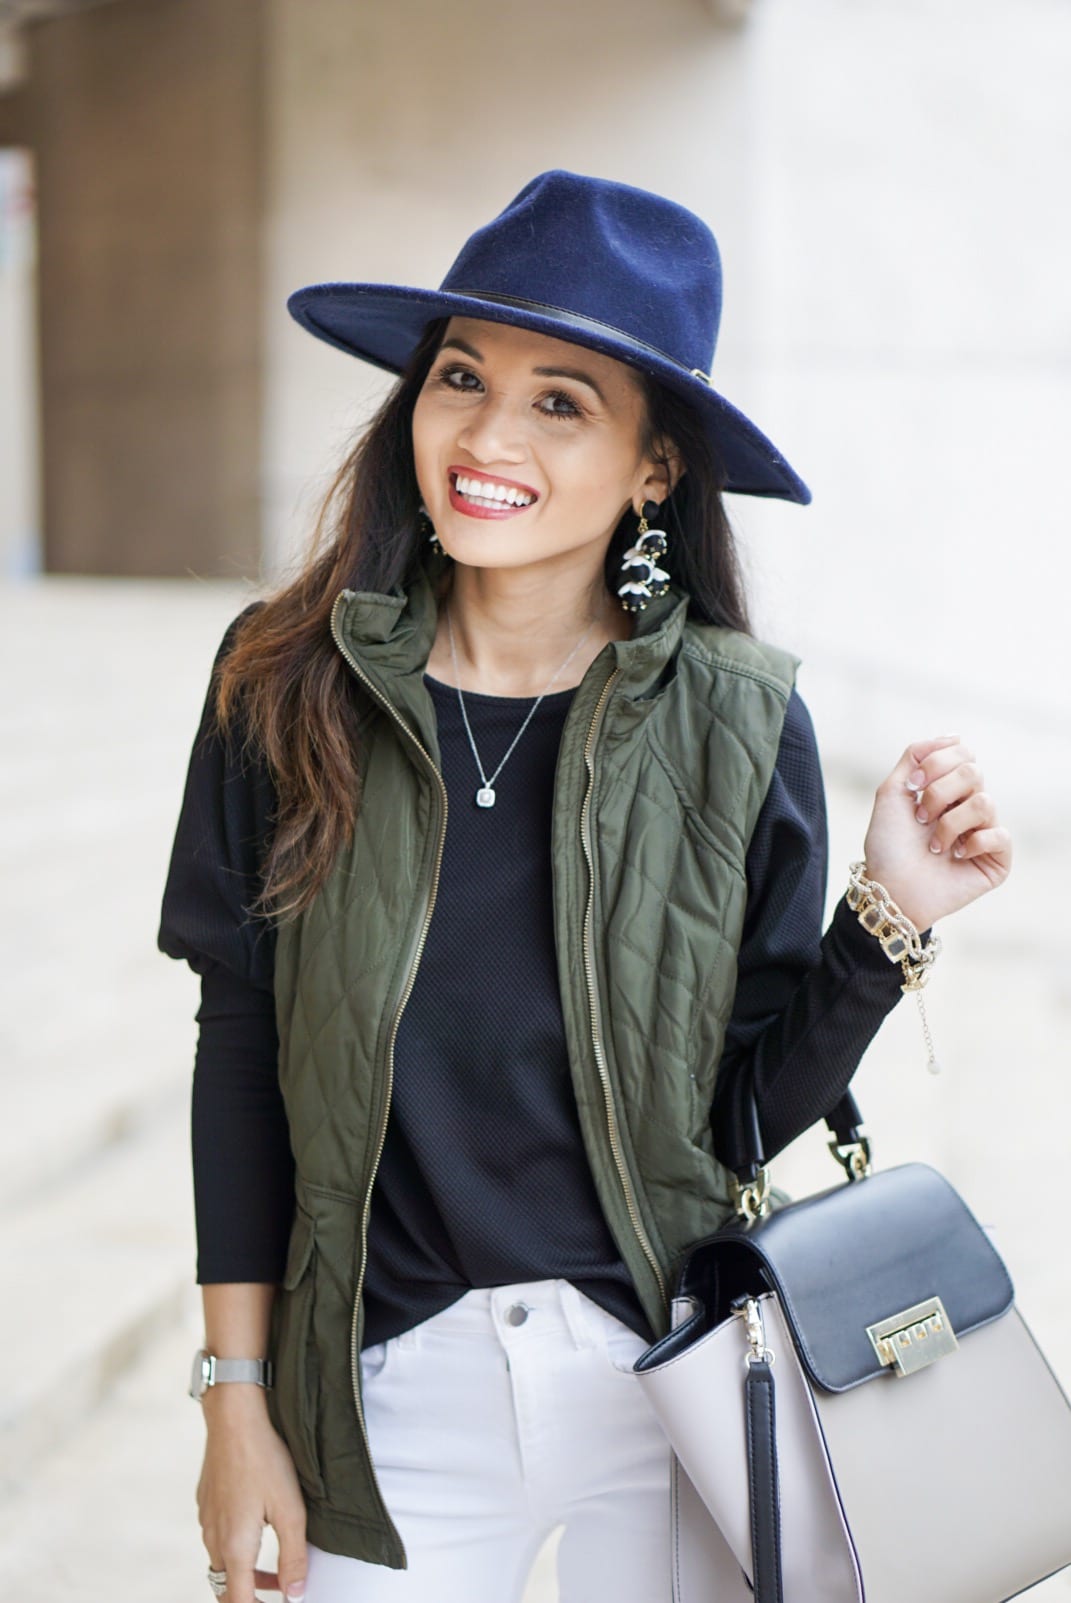 utility vest, green vest, Zac Posen bag, white jeans, white denim outfit, lace up heels, navy felt brim hat, red dress boutique, puff sleeves, bauble bar earrings, statement earrings, how to wear a vest, winter outfit, how to style a hat 